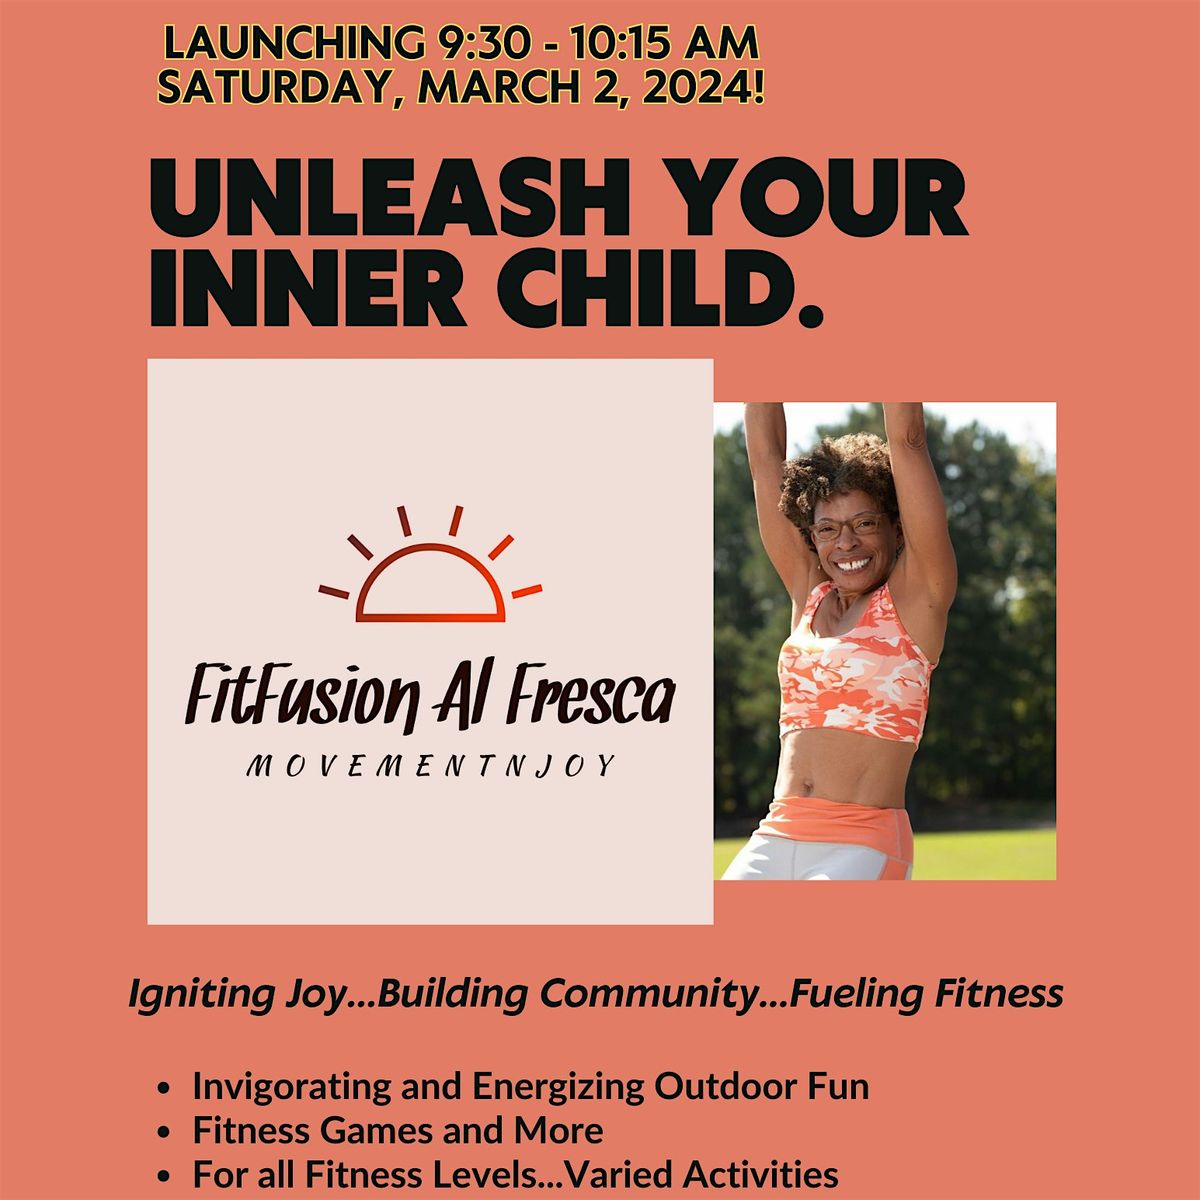 May 4th FitFusion Al Fresca! FREE for First timers!